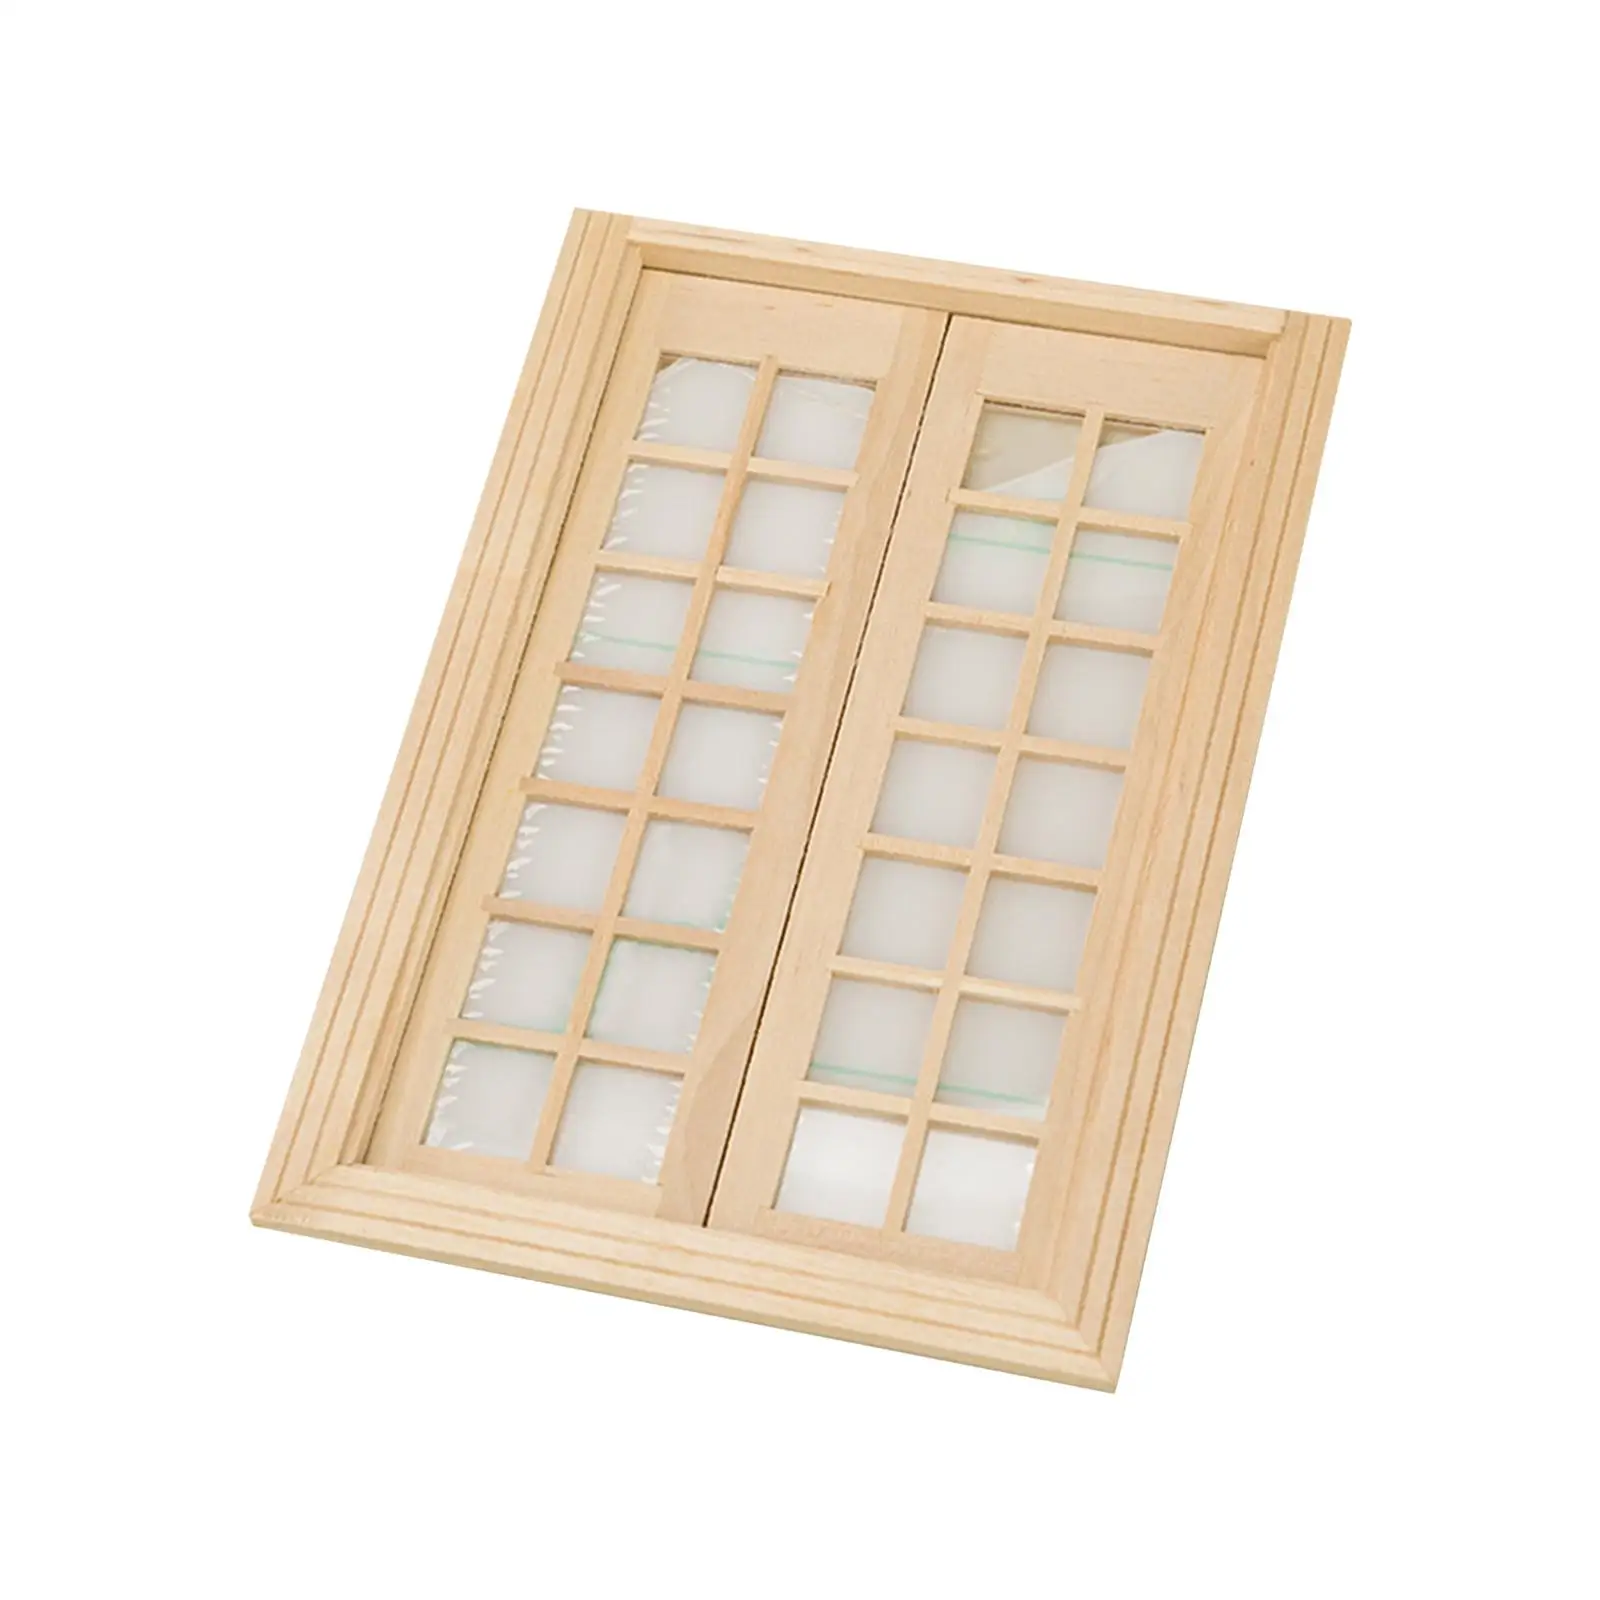 Doll Wooden Small Window Photo Props Mini House Scene Props Miniature Furniture for Kitchen Study Living Room Bedroom Decoration